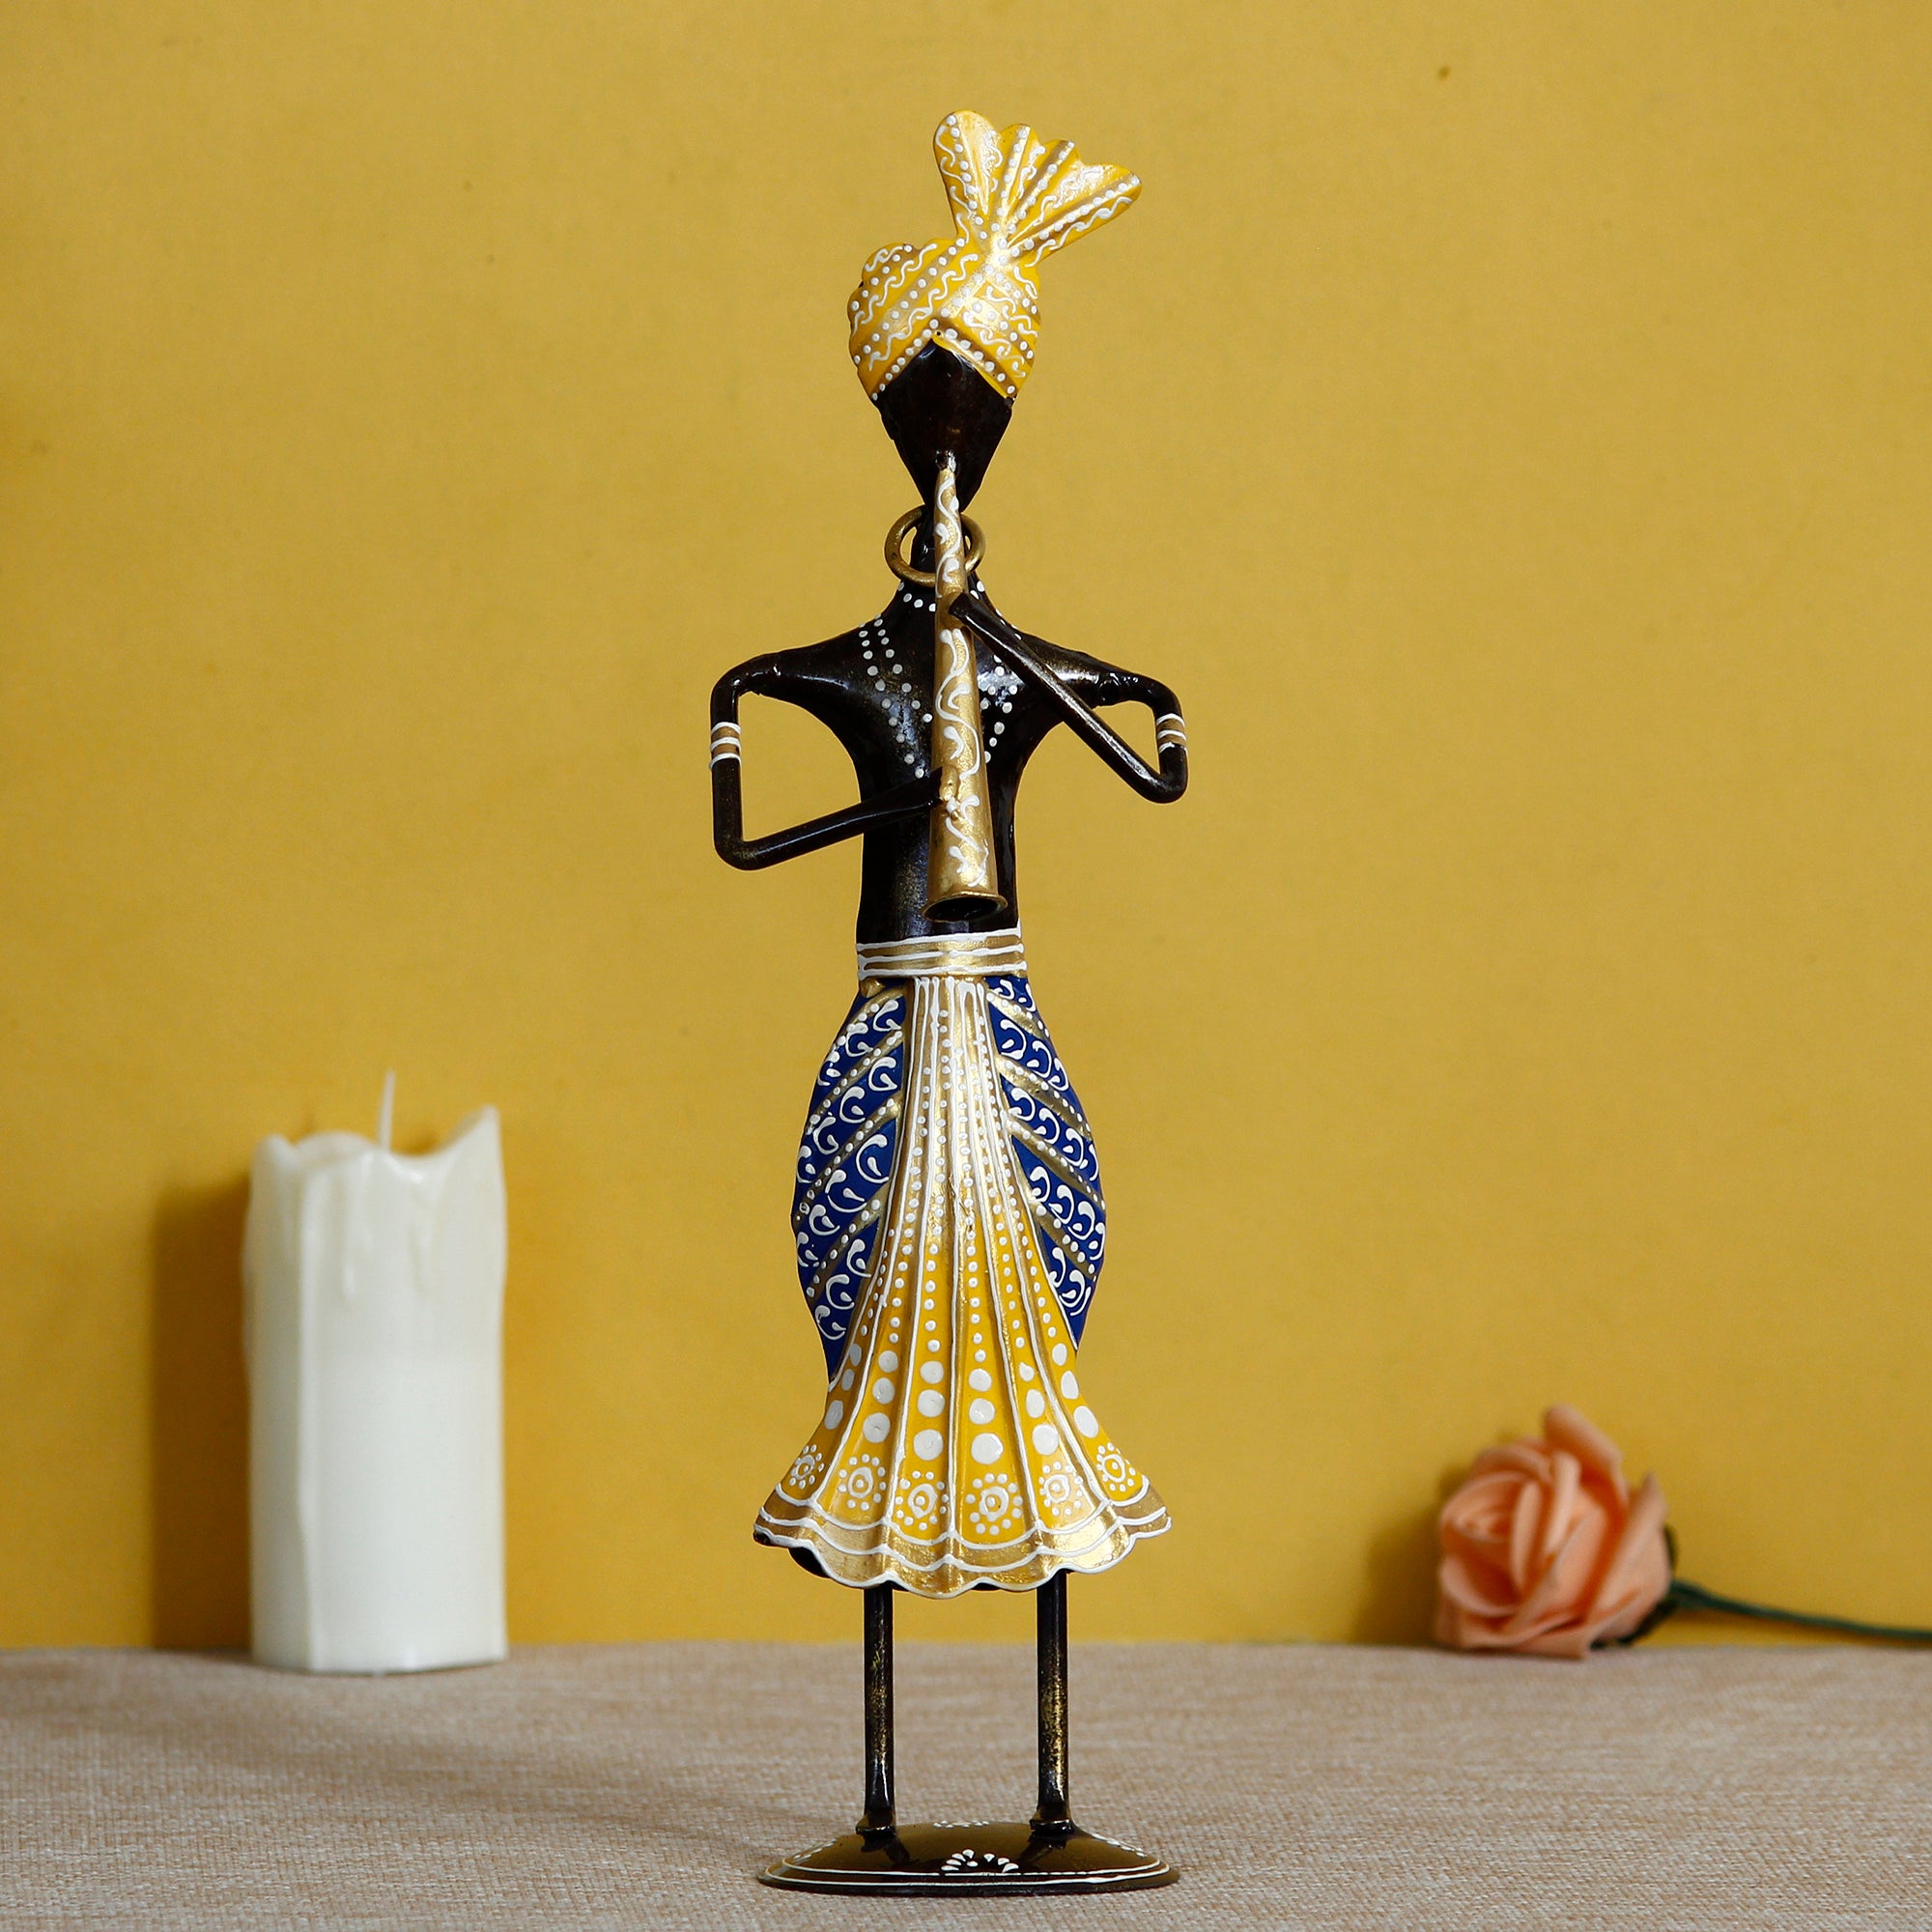 Iron Tribal Man Figurine Playing Trumpet Musical Instrument Decorative Showpiece (Black, Yellow and Blue) 1